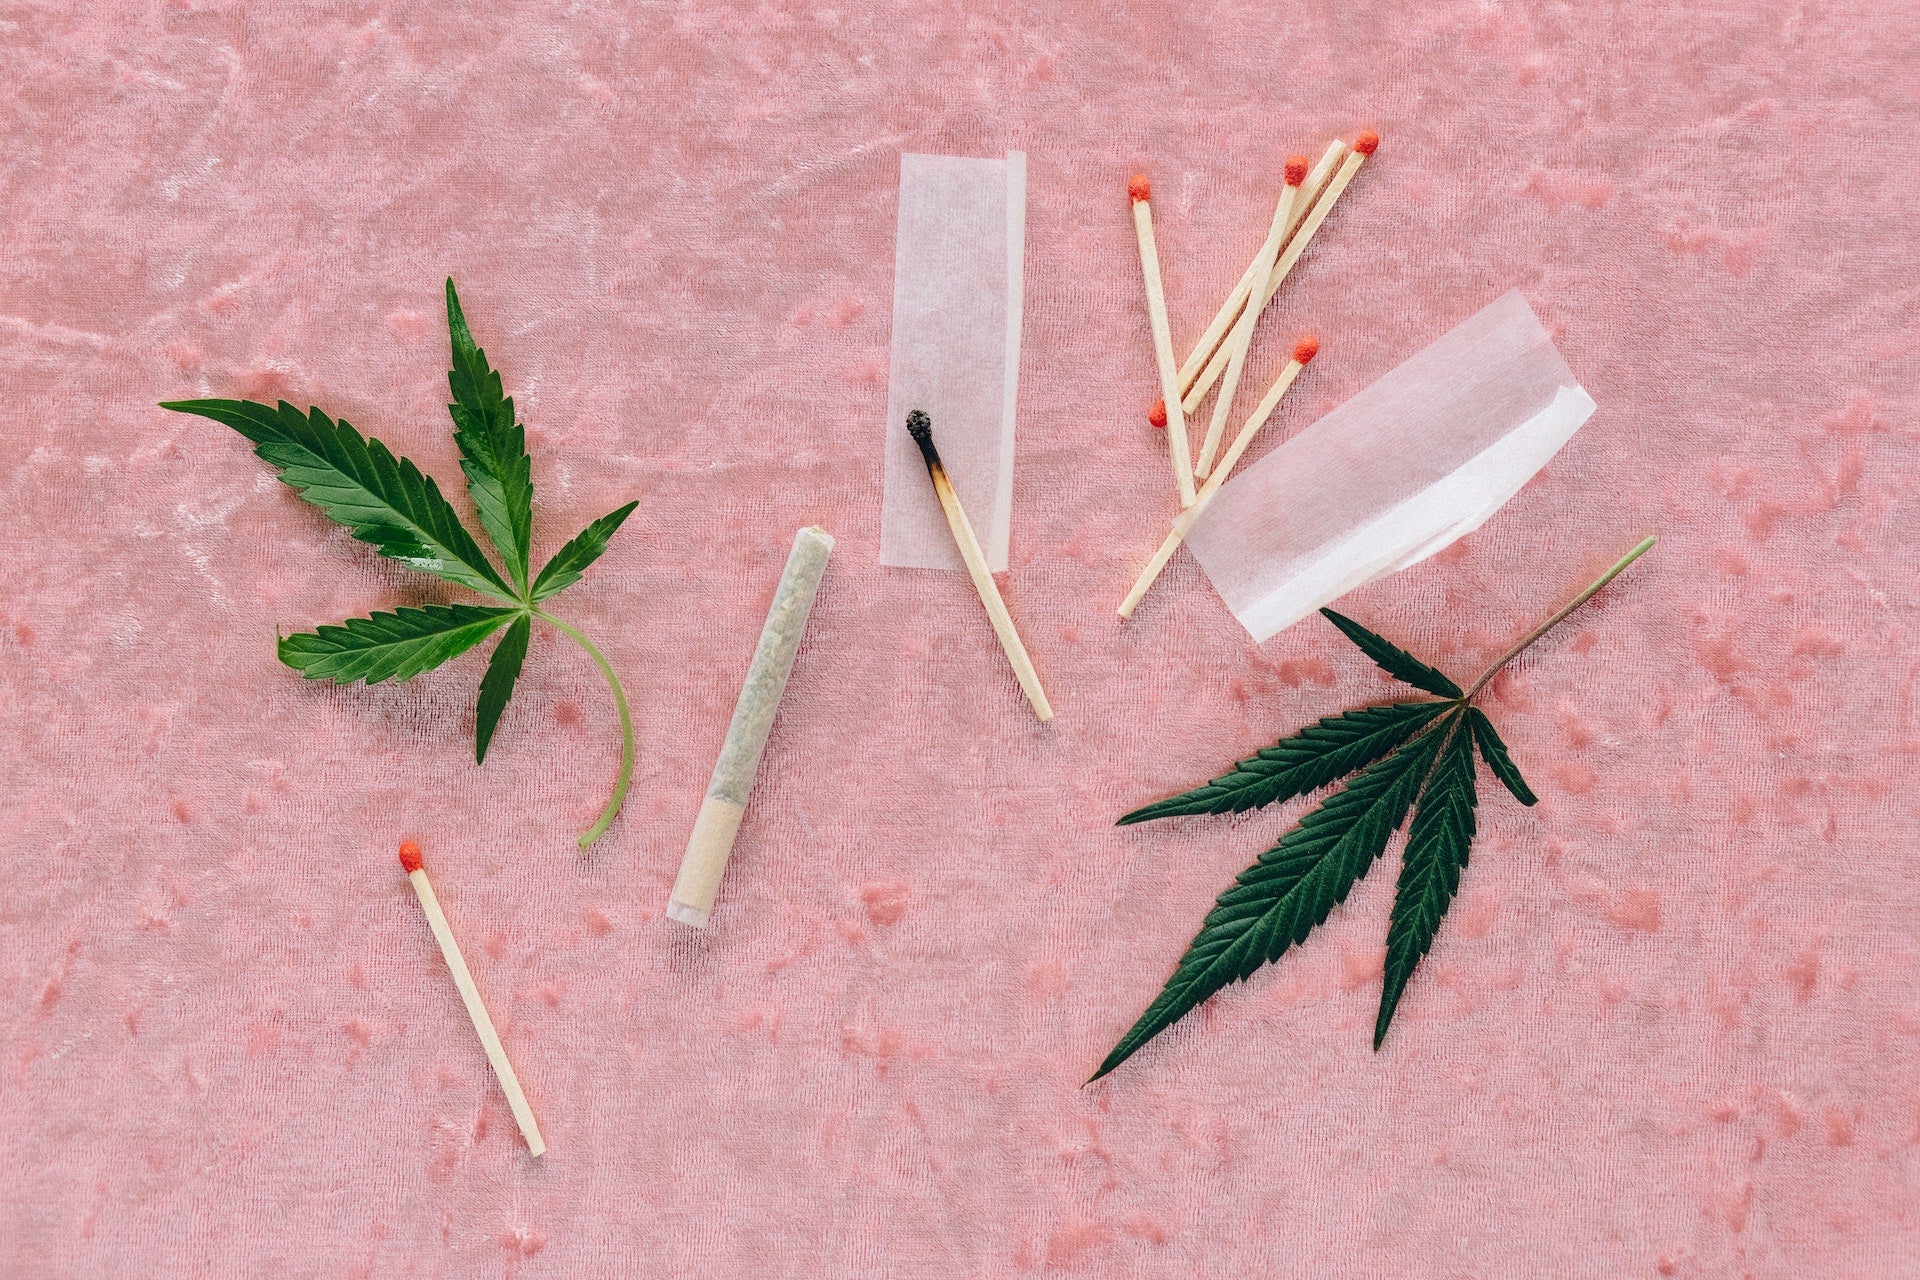 What Does The Shape Of The Cannabis Leaf Mean?